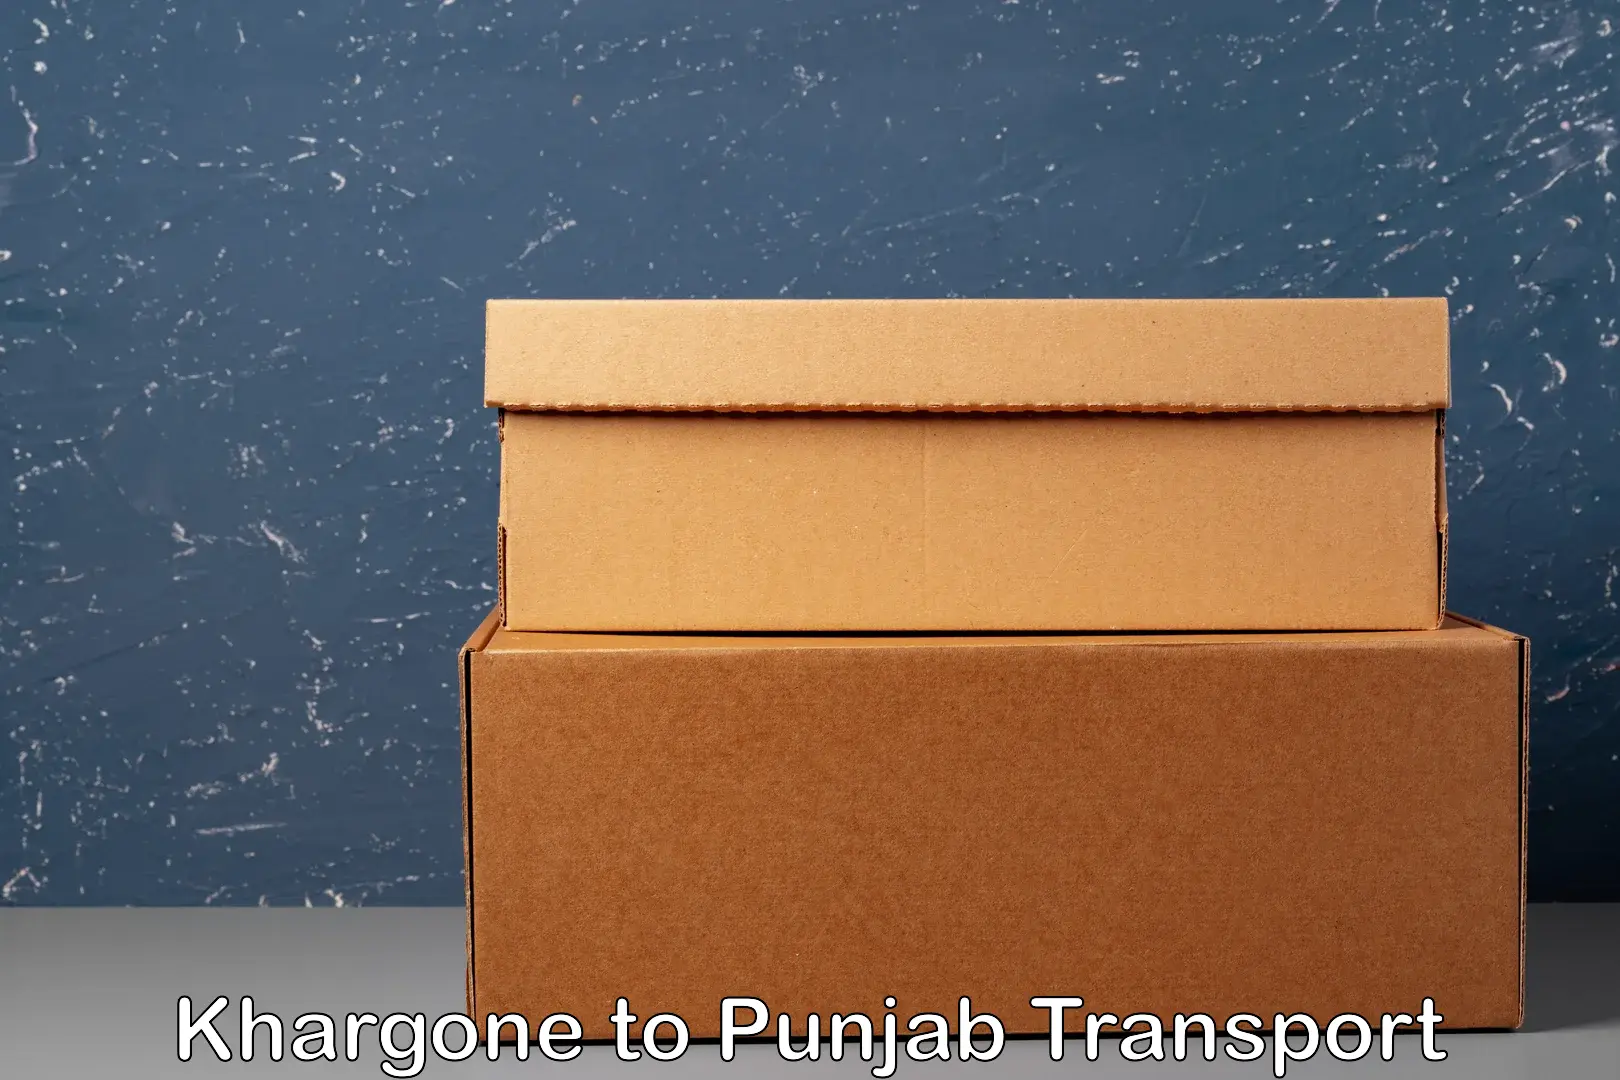 Goods delivery service Khargone to Ludhiana